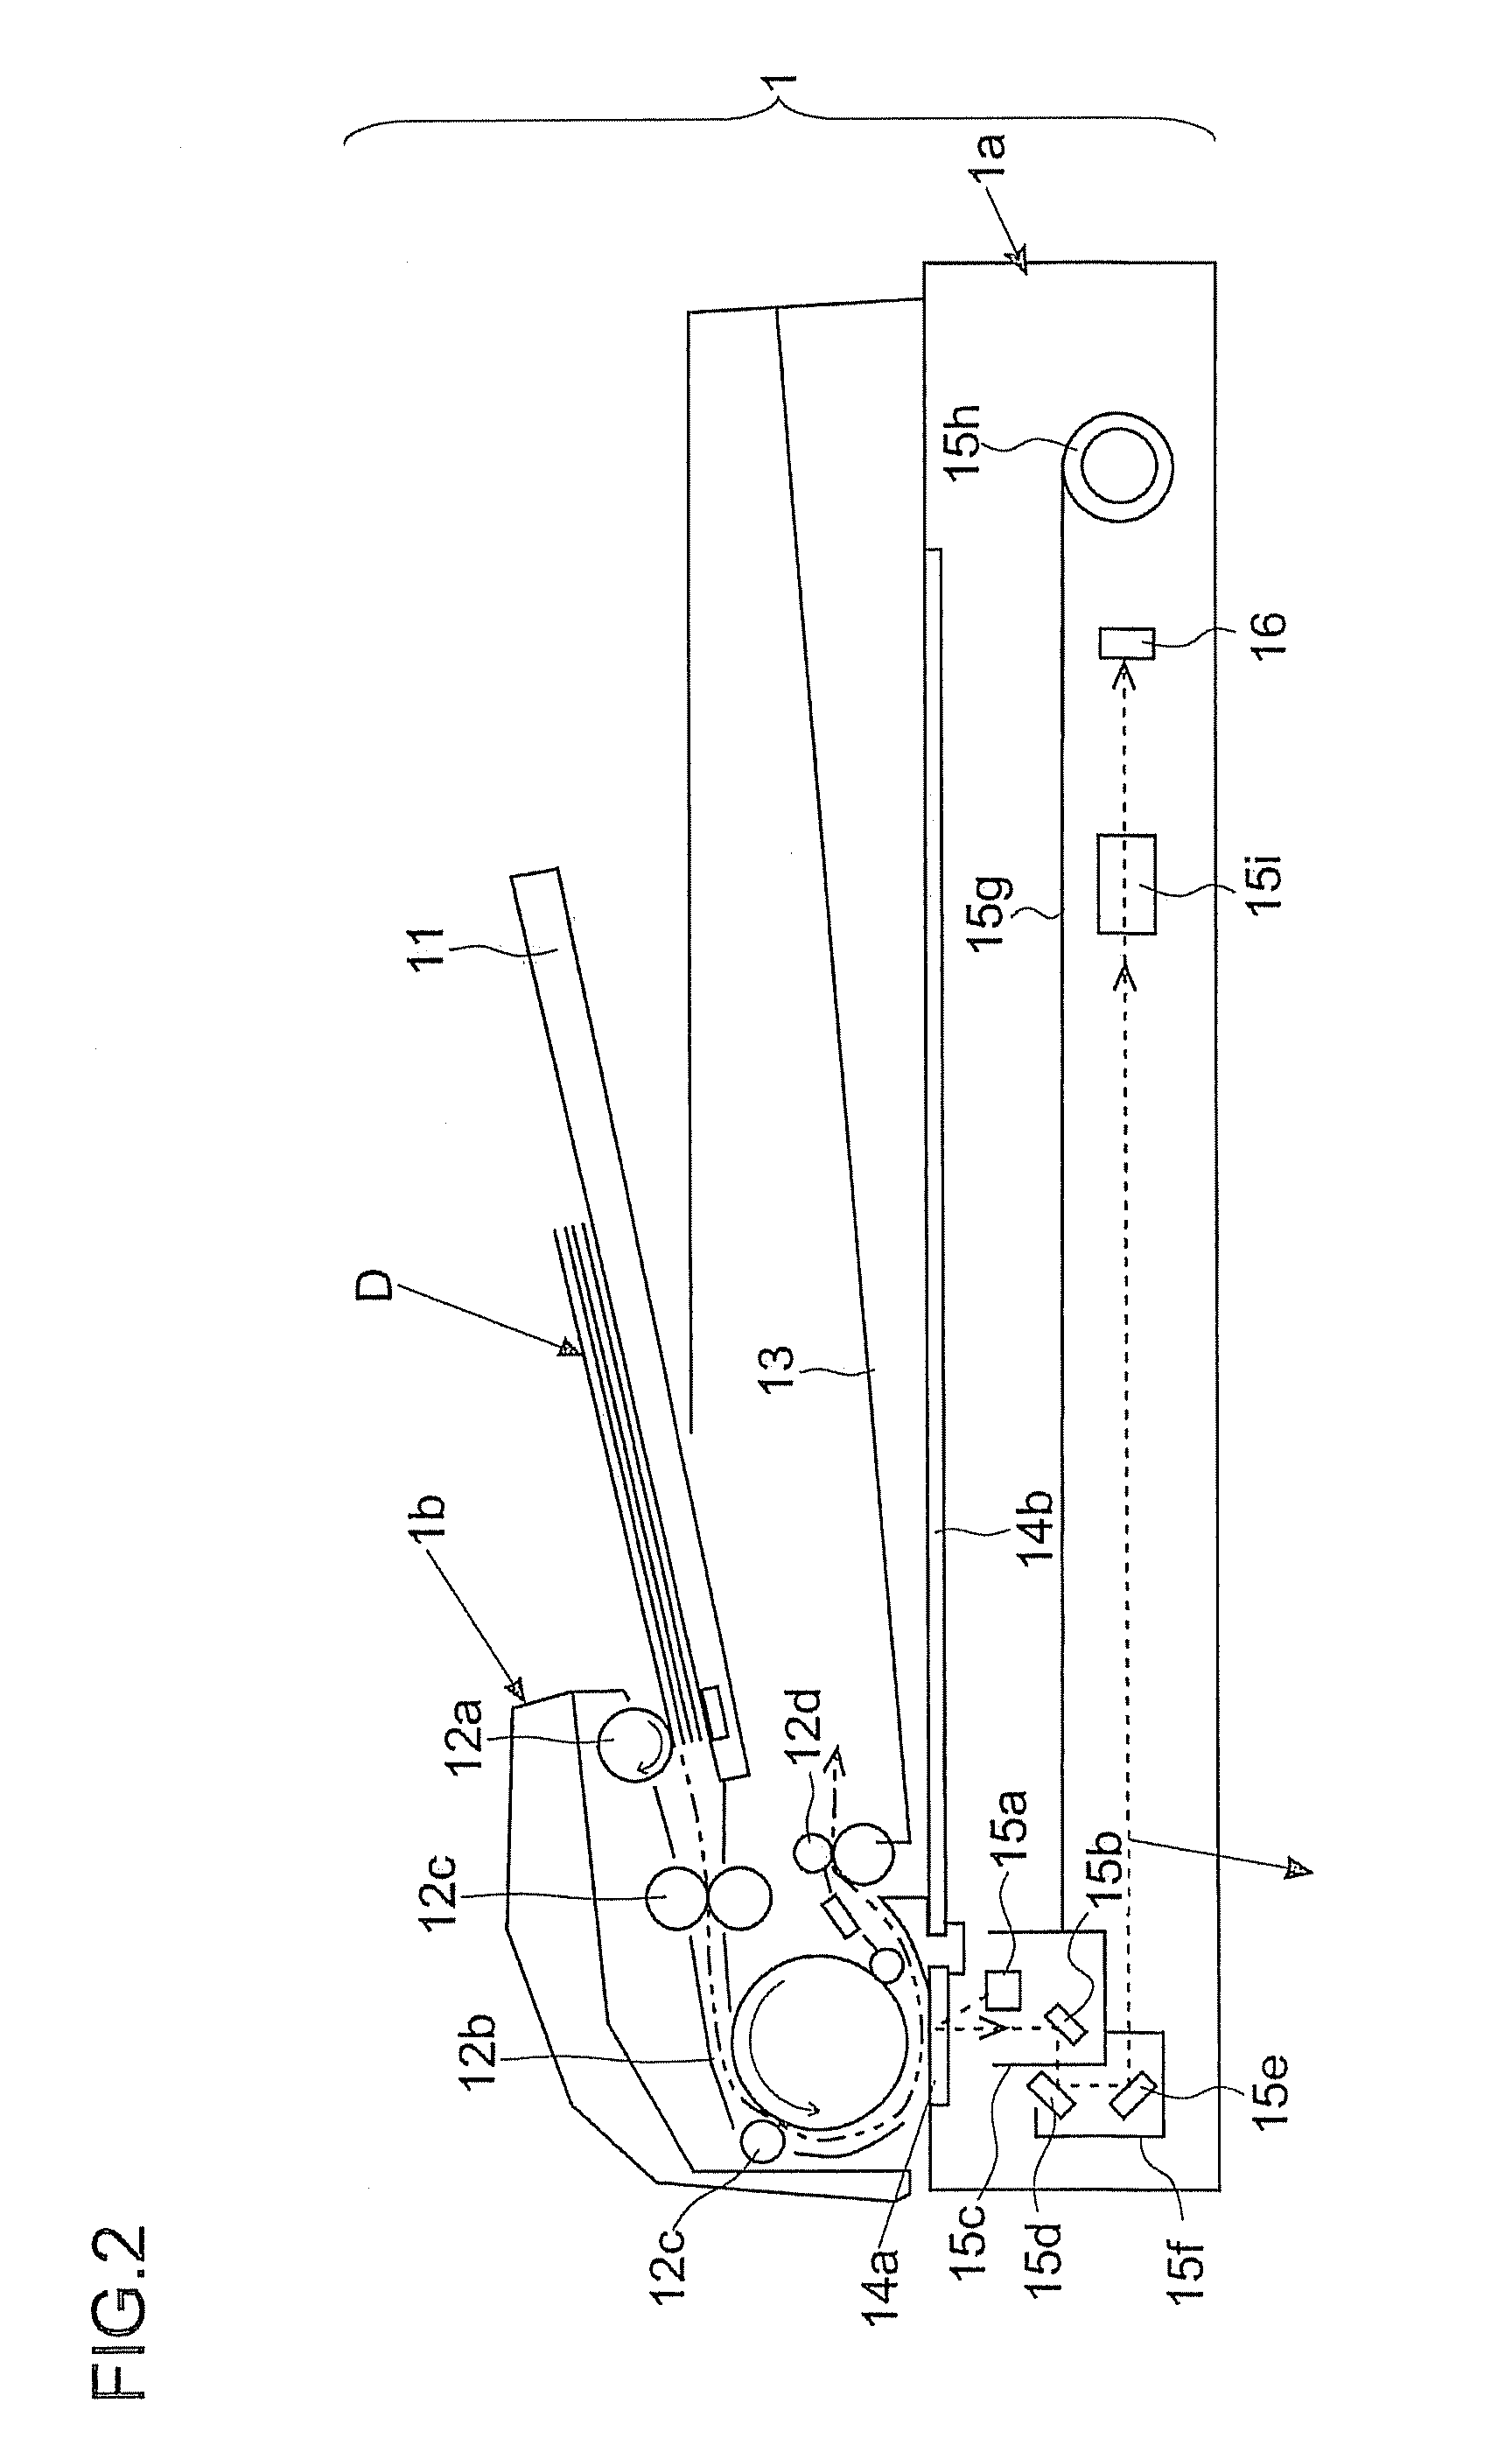 Image forming apparatus and control method of an image forming apparatus